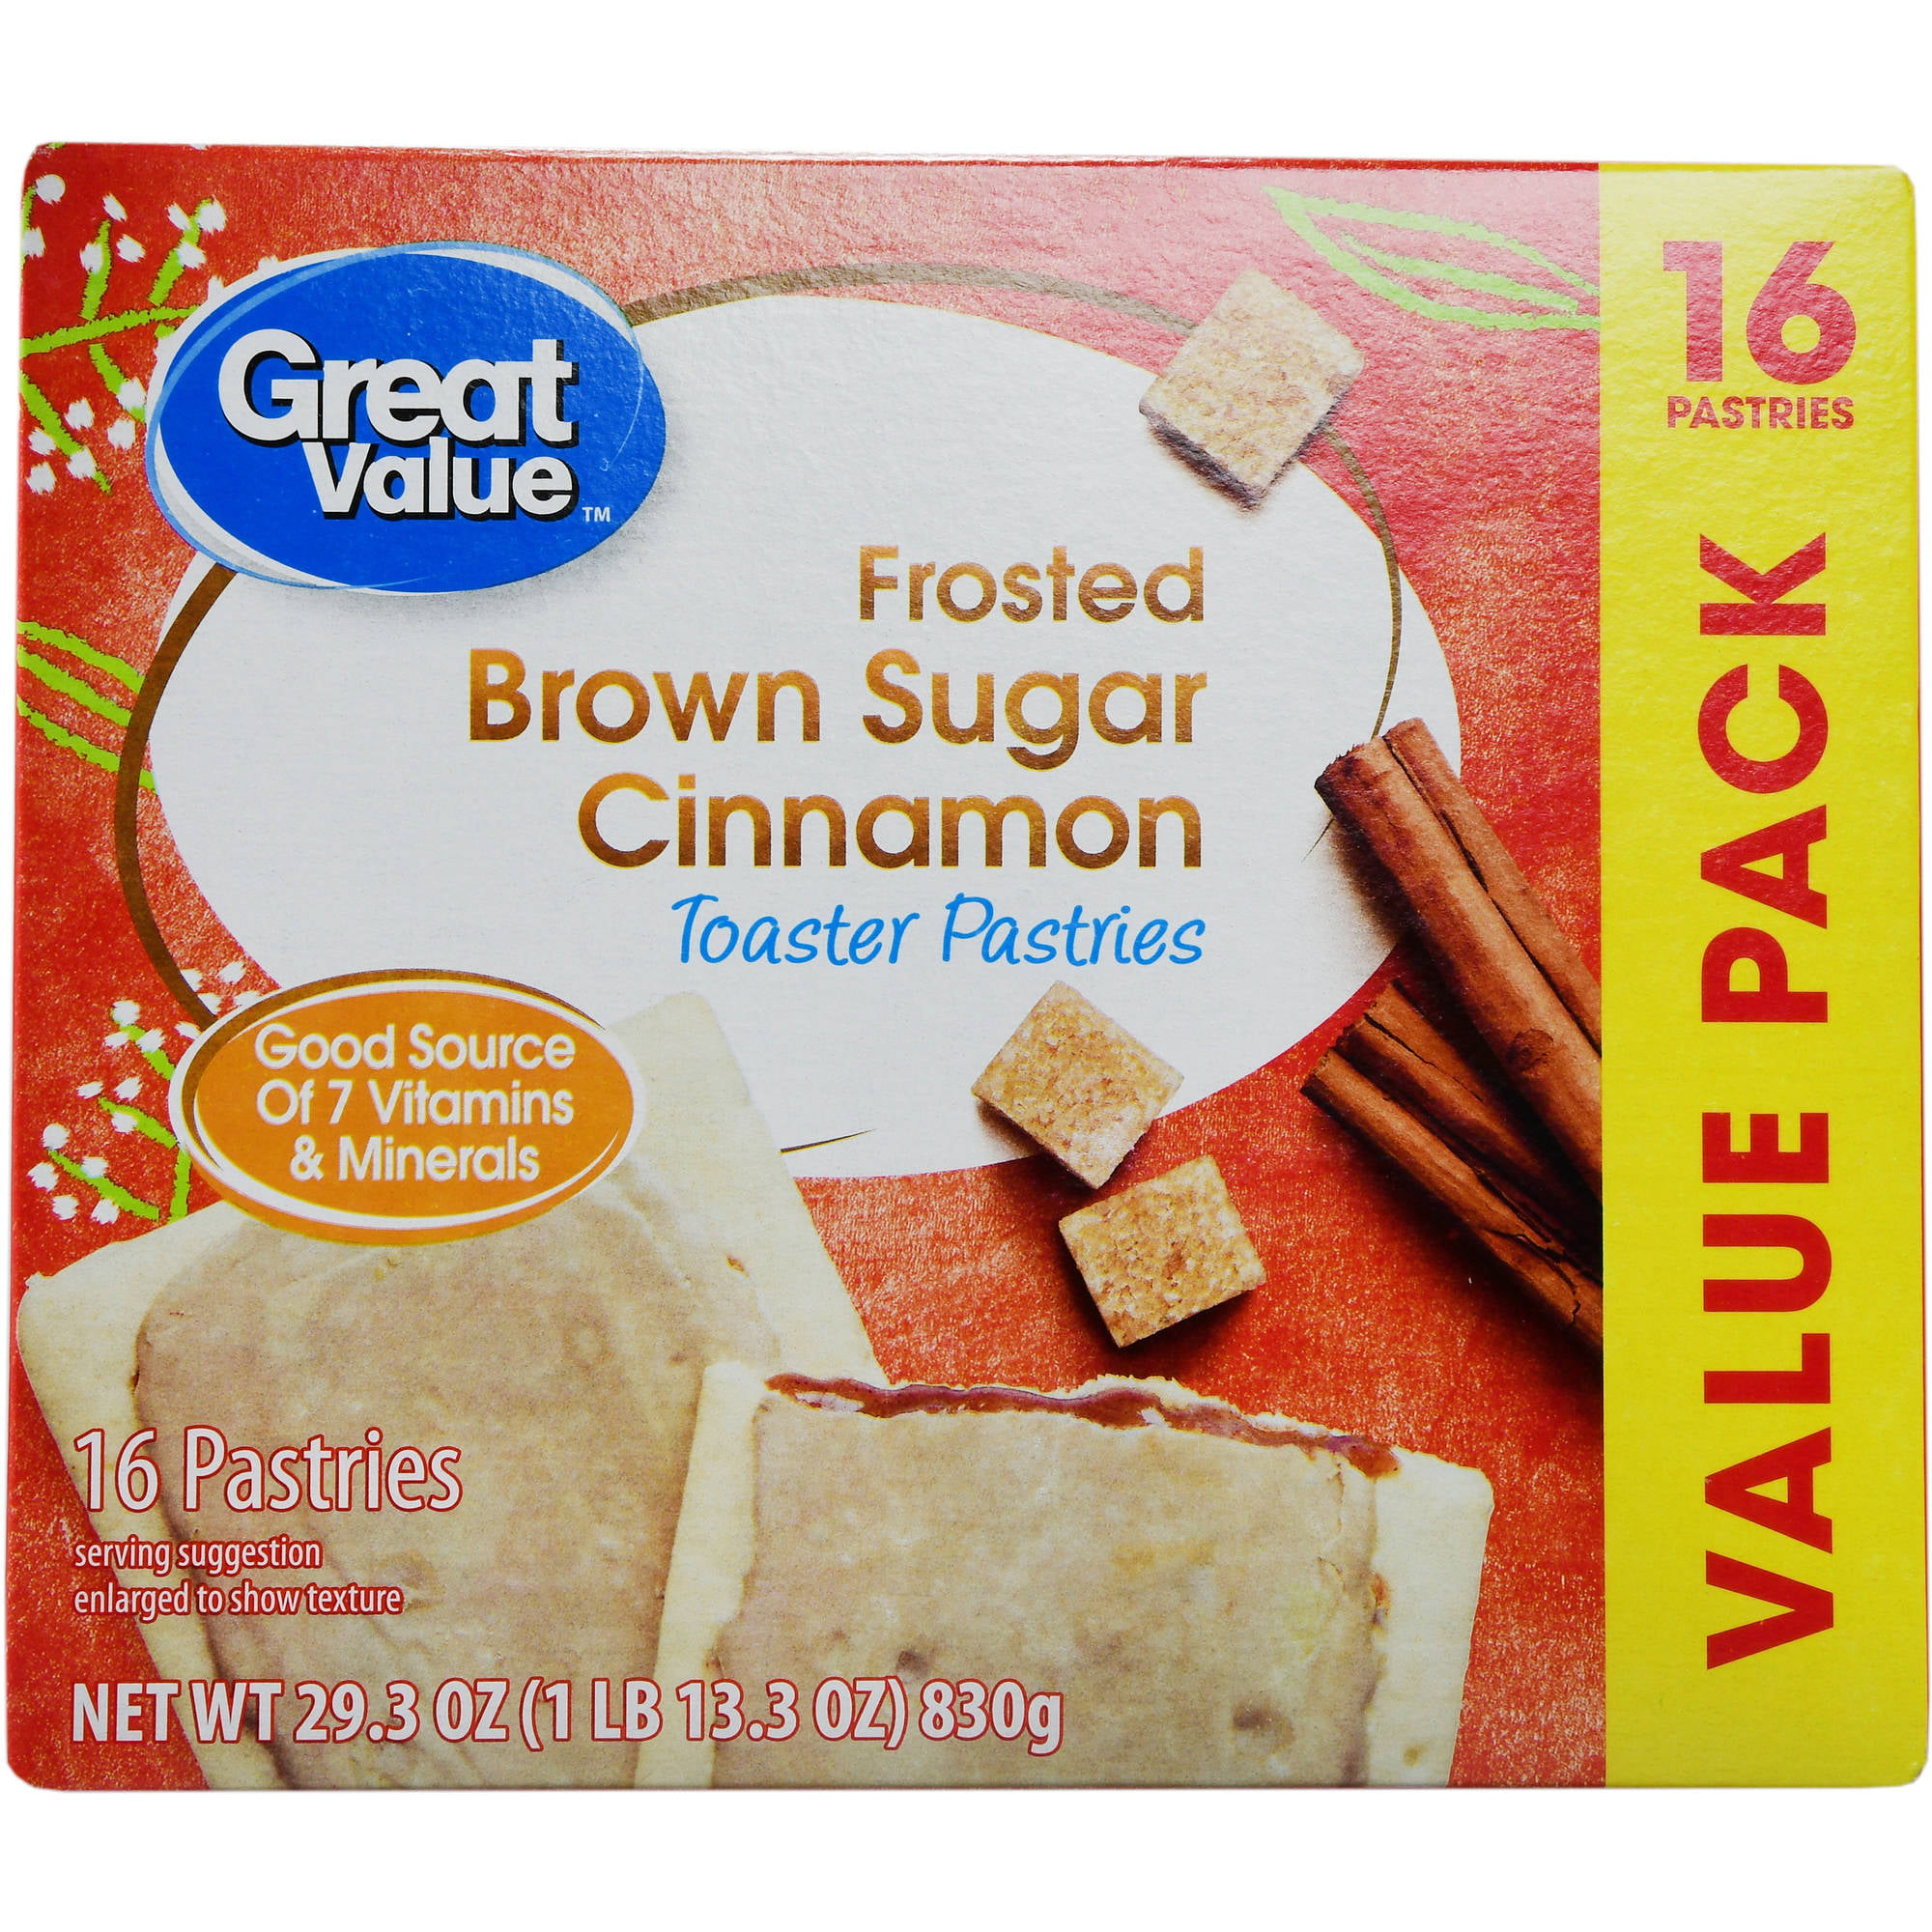 Great Value Frosted Brown Sugar Cinnamon Toaster Pastries, 16 count